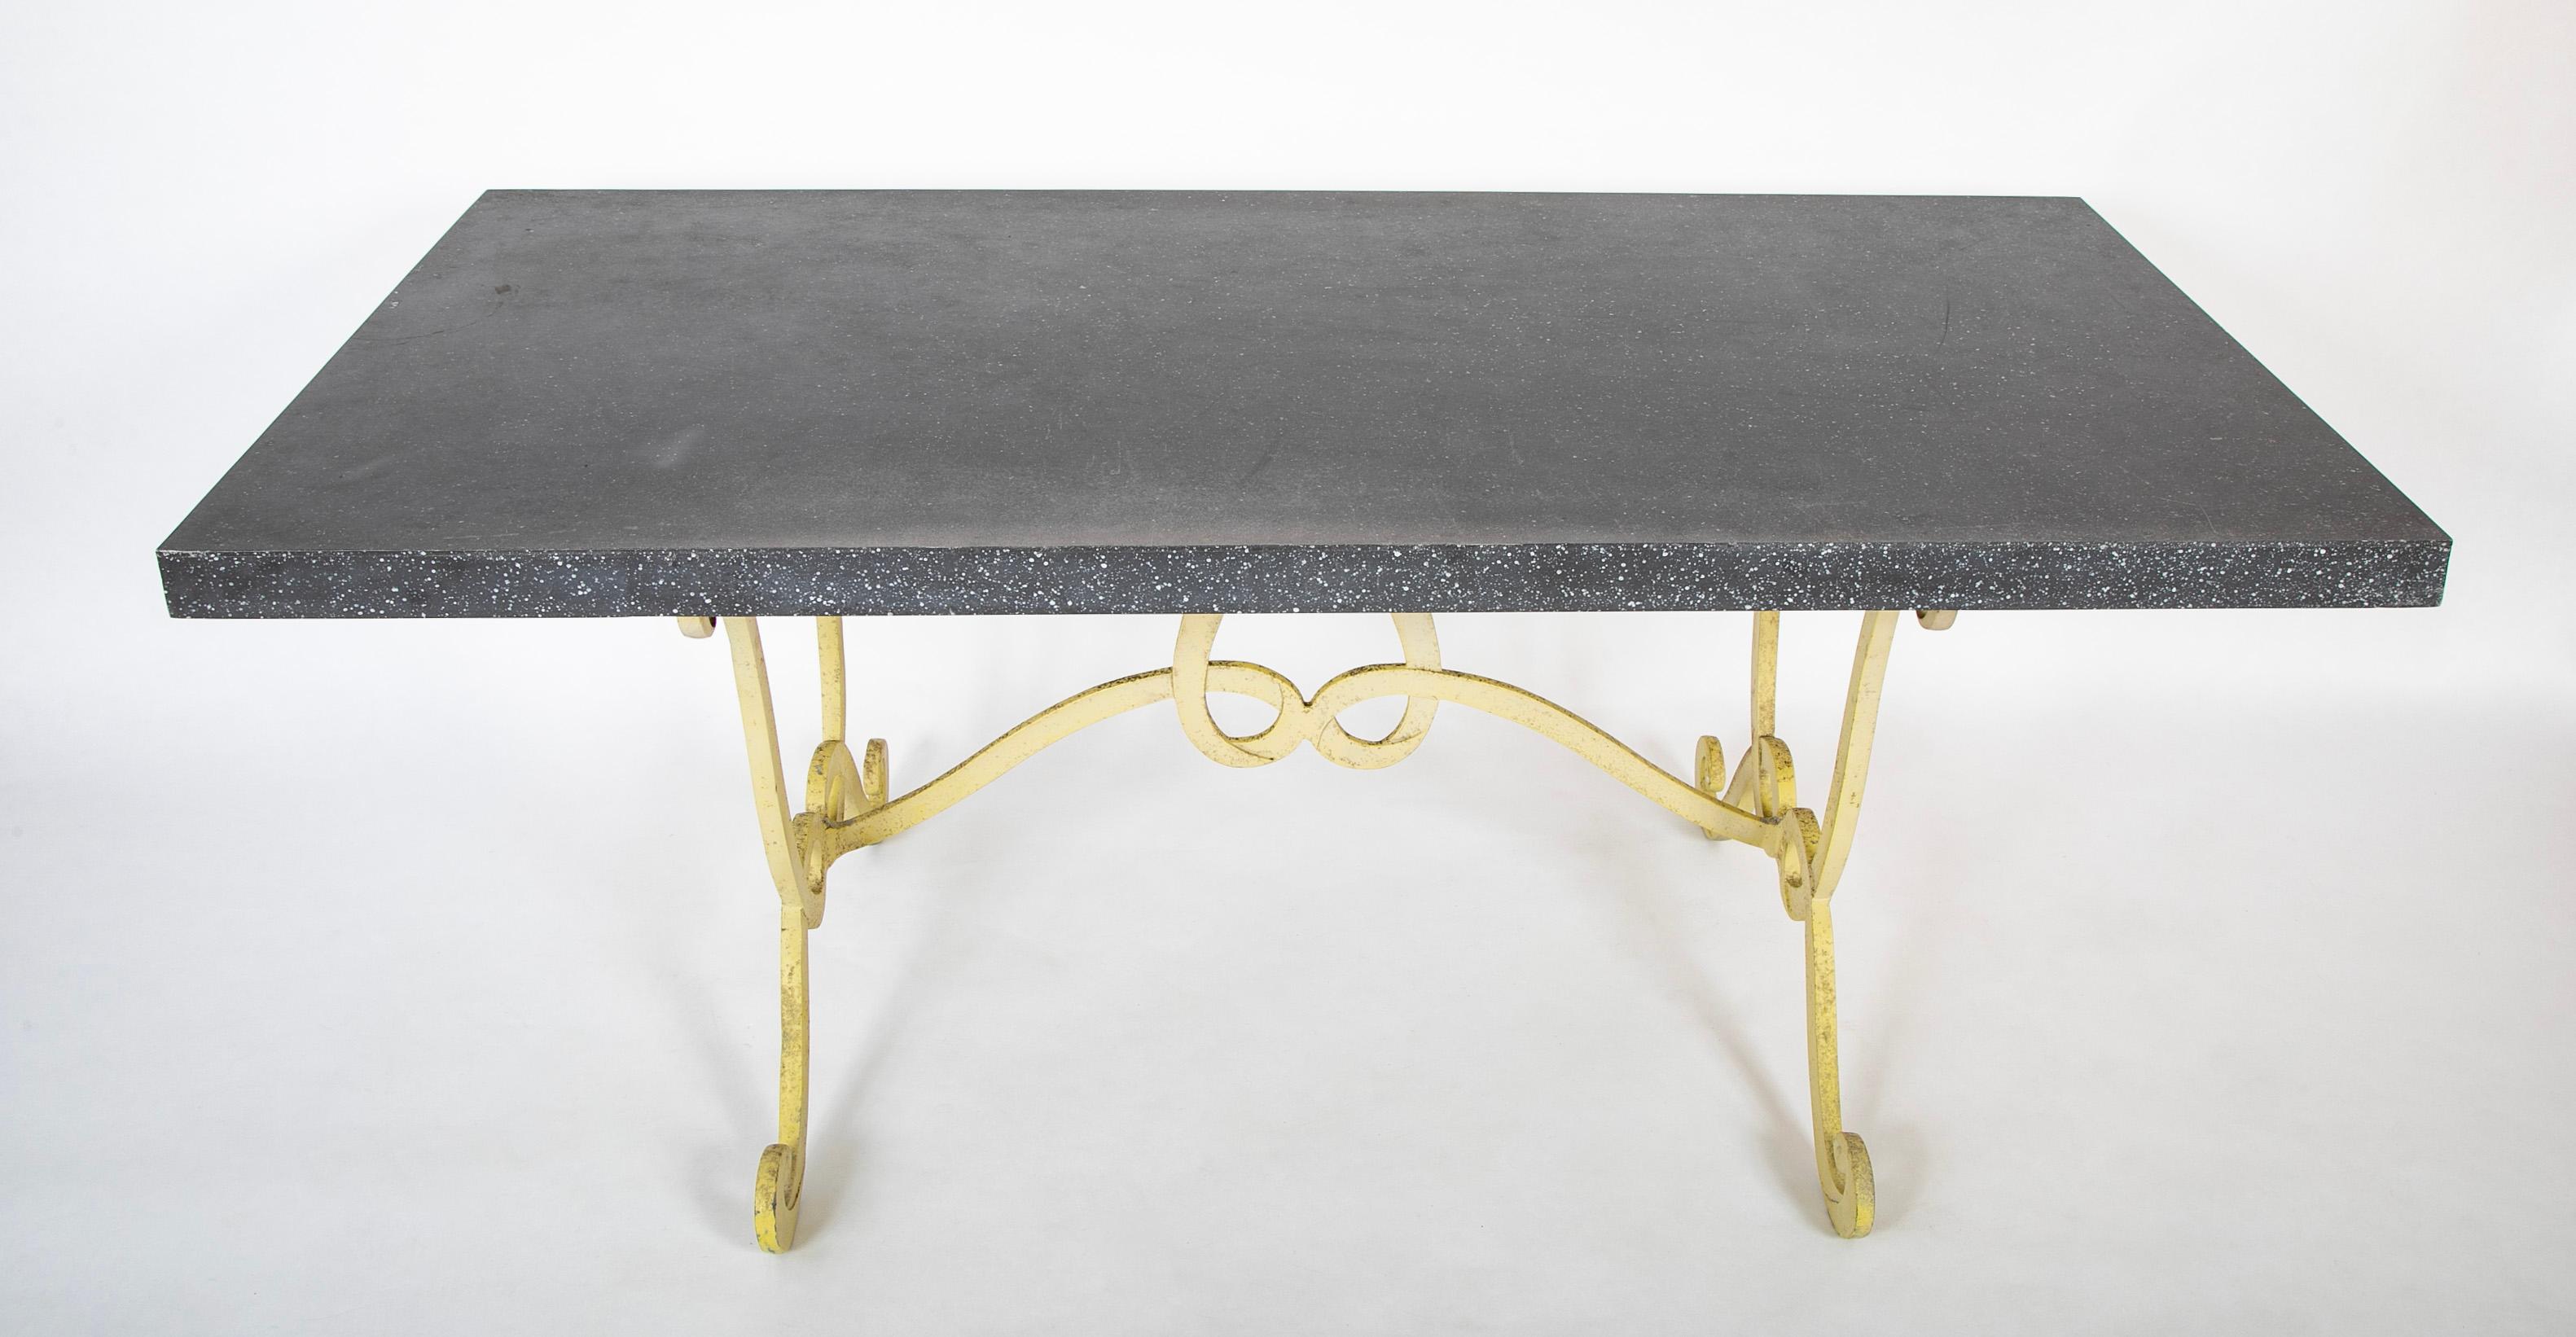 Rare, unusual and possibly unique table attributed to Dorothy Draper. The steel top painted in faux black porphyry, the wonderful wrought iron base a pale yellow. All original paint. The base screams Draper, with its entwined elegant Rococo inspired